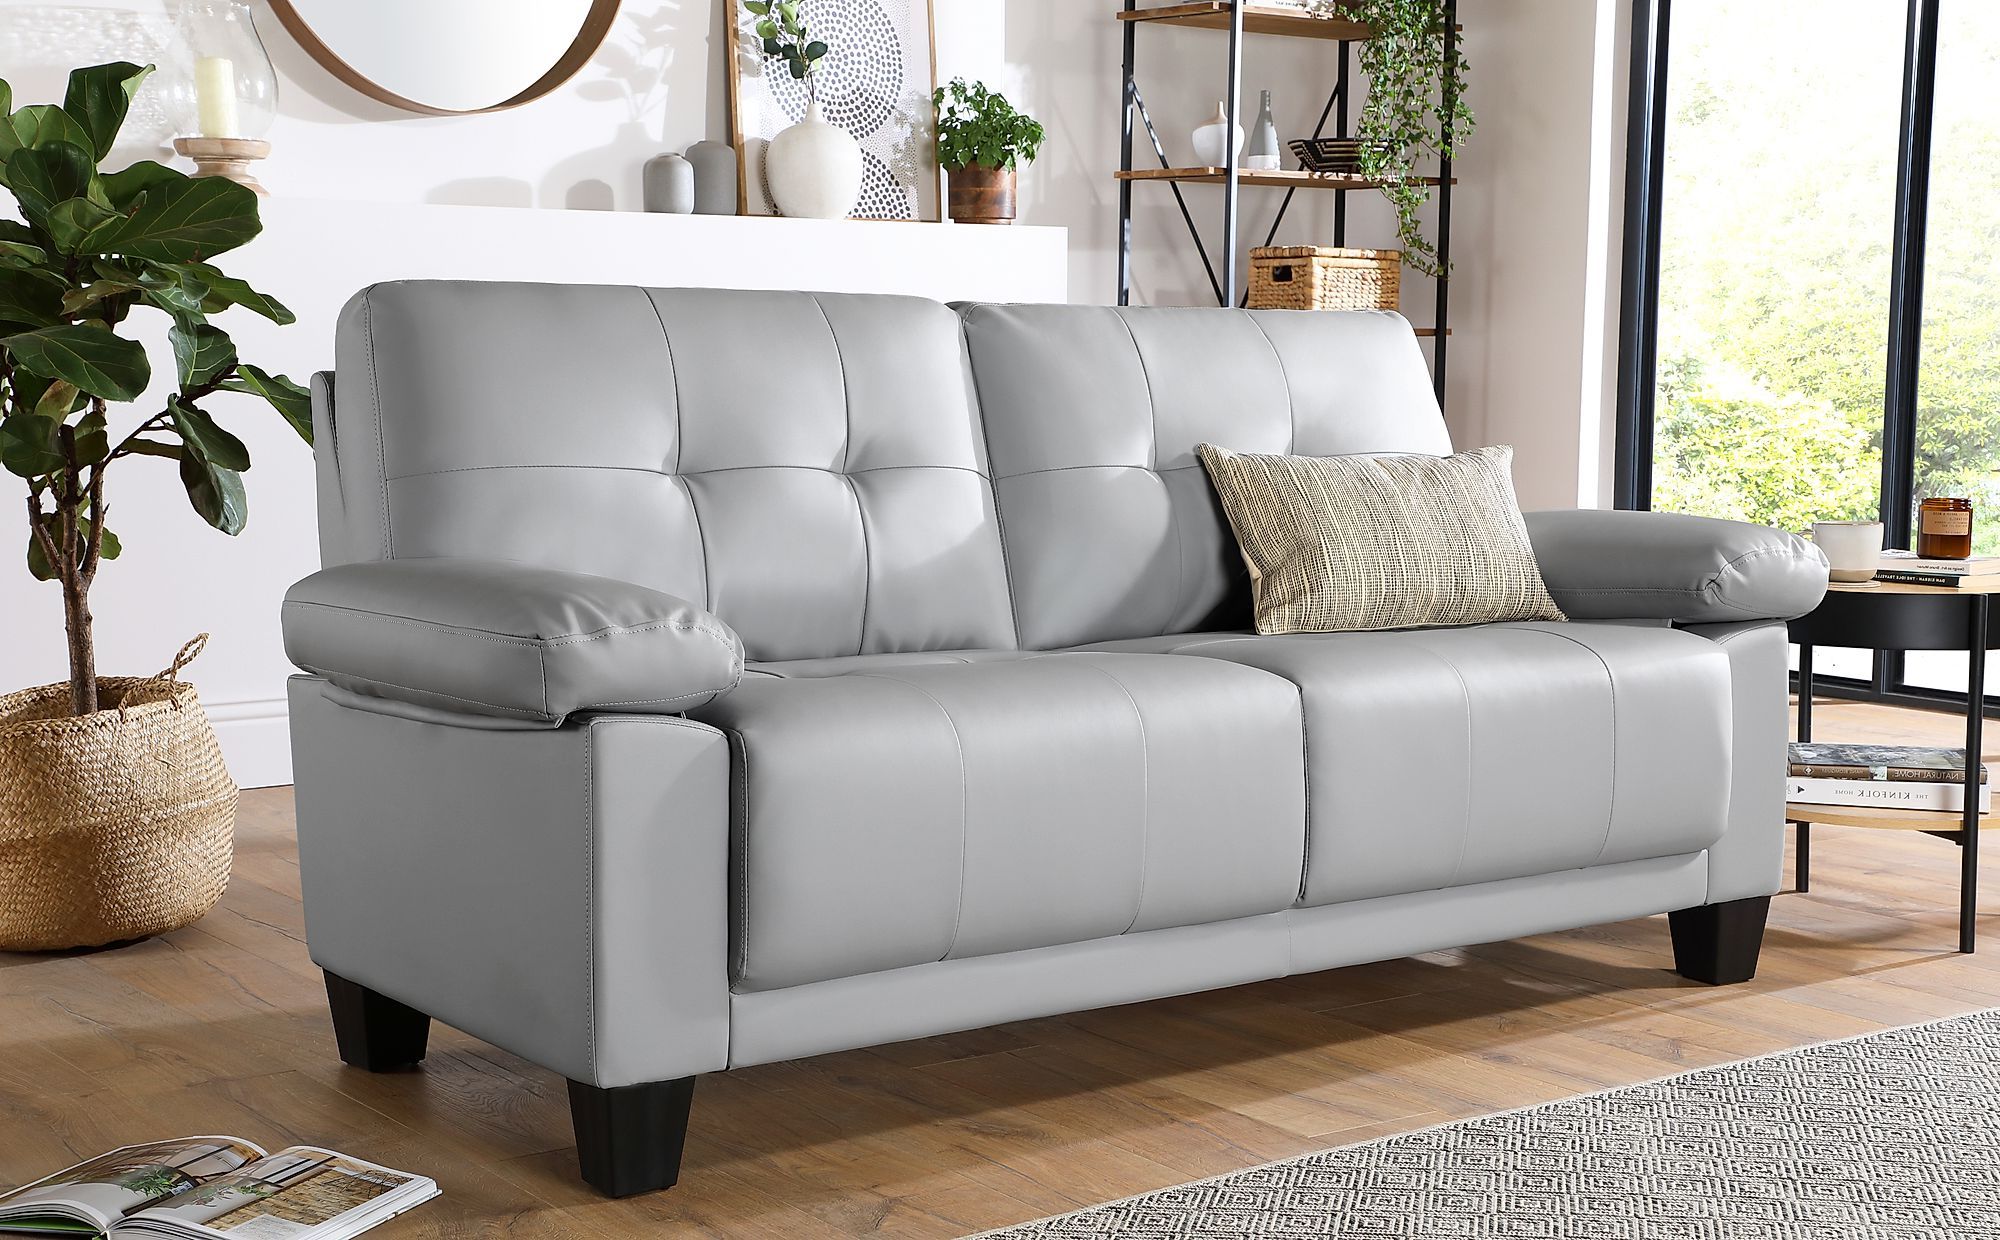 Linton Small Light Grey Leather 3 Seater Sofa | Furniture Choice Inside Sofas In Light Gray (View 17 of 20)